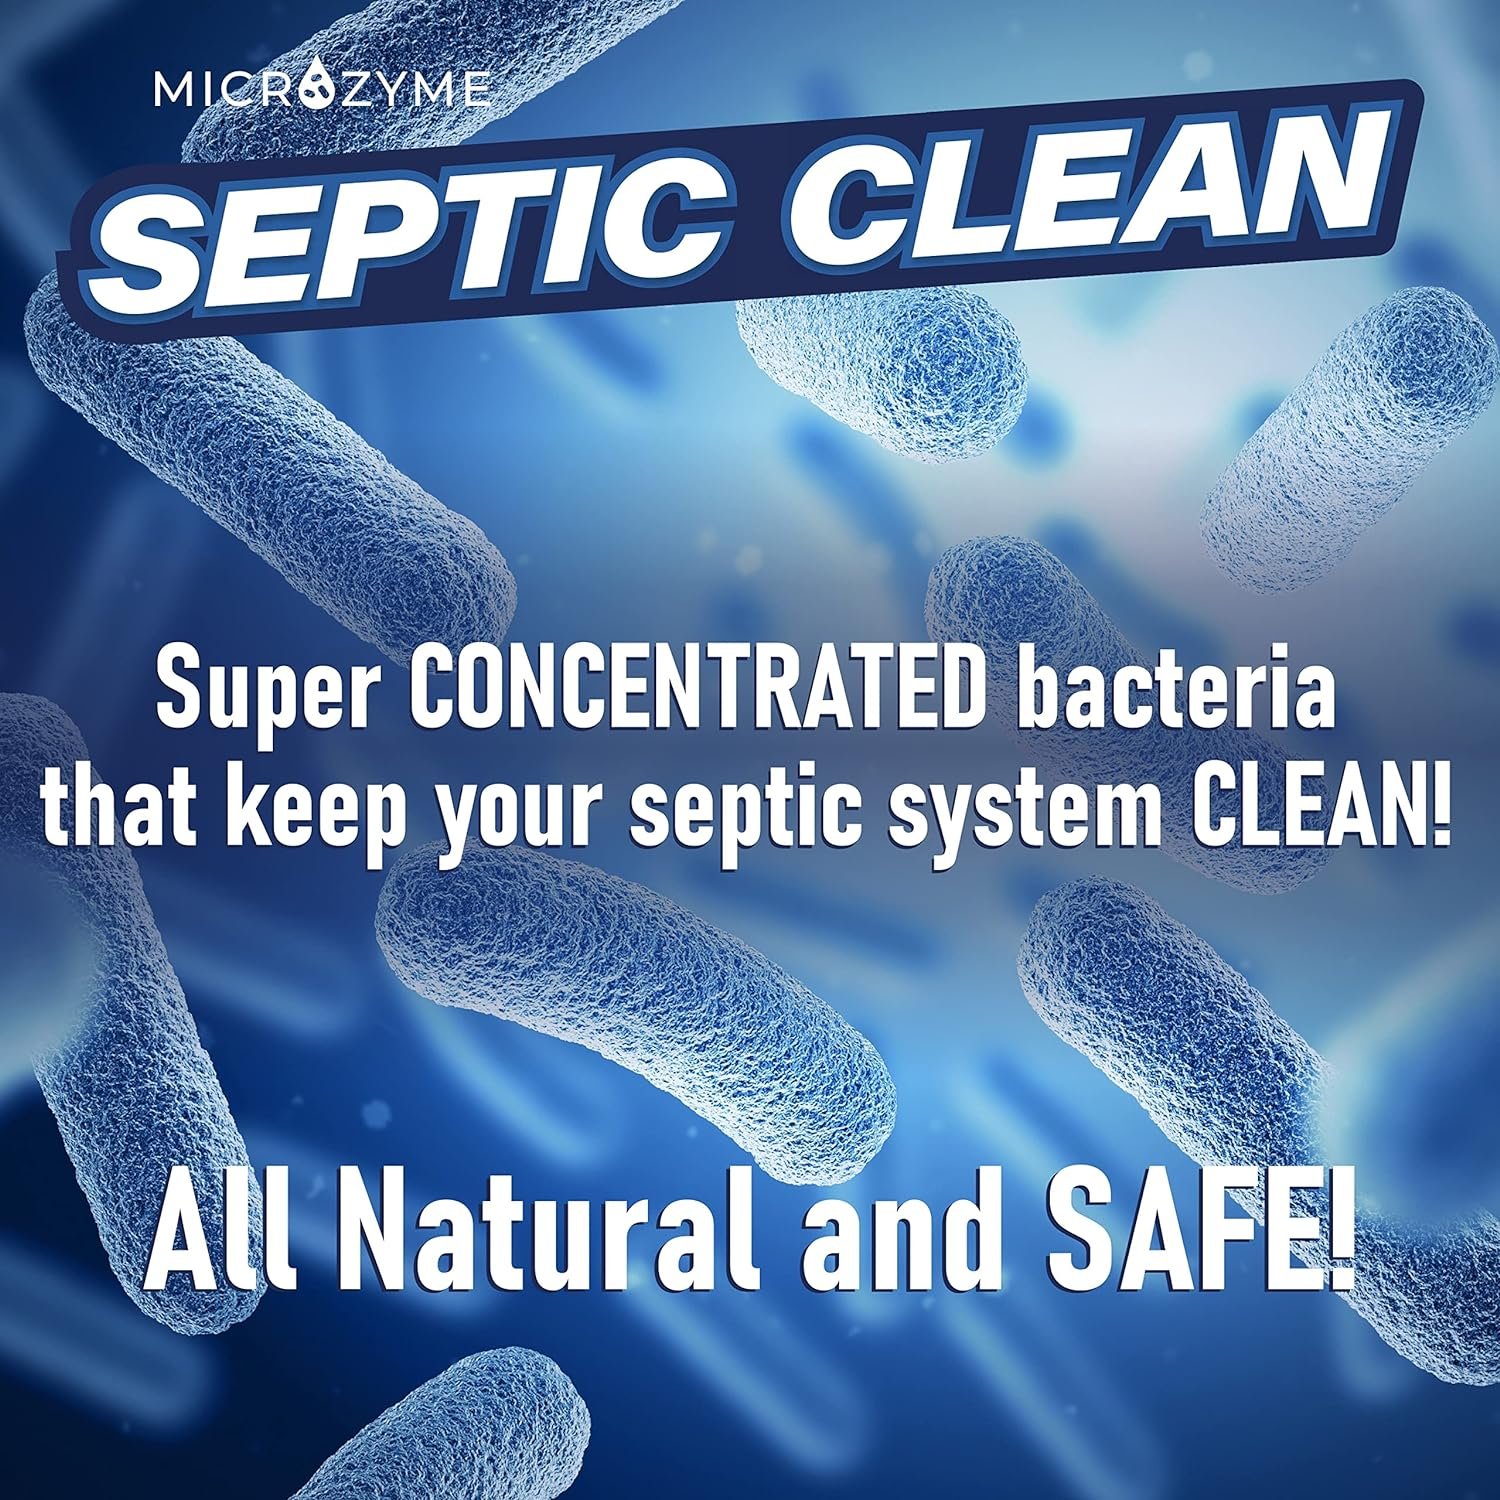 Microzyme SEPTIC CLEAN | Septic Tank Cleaner Treatment Packets with Bacteria | 6-month Supply of Water Soluble Packets for a Healthy Septic System